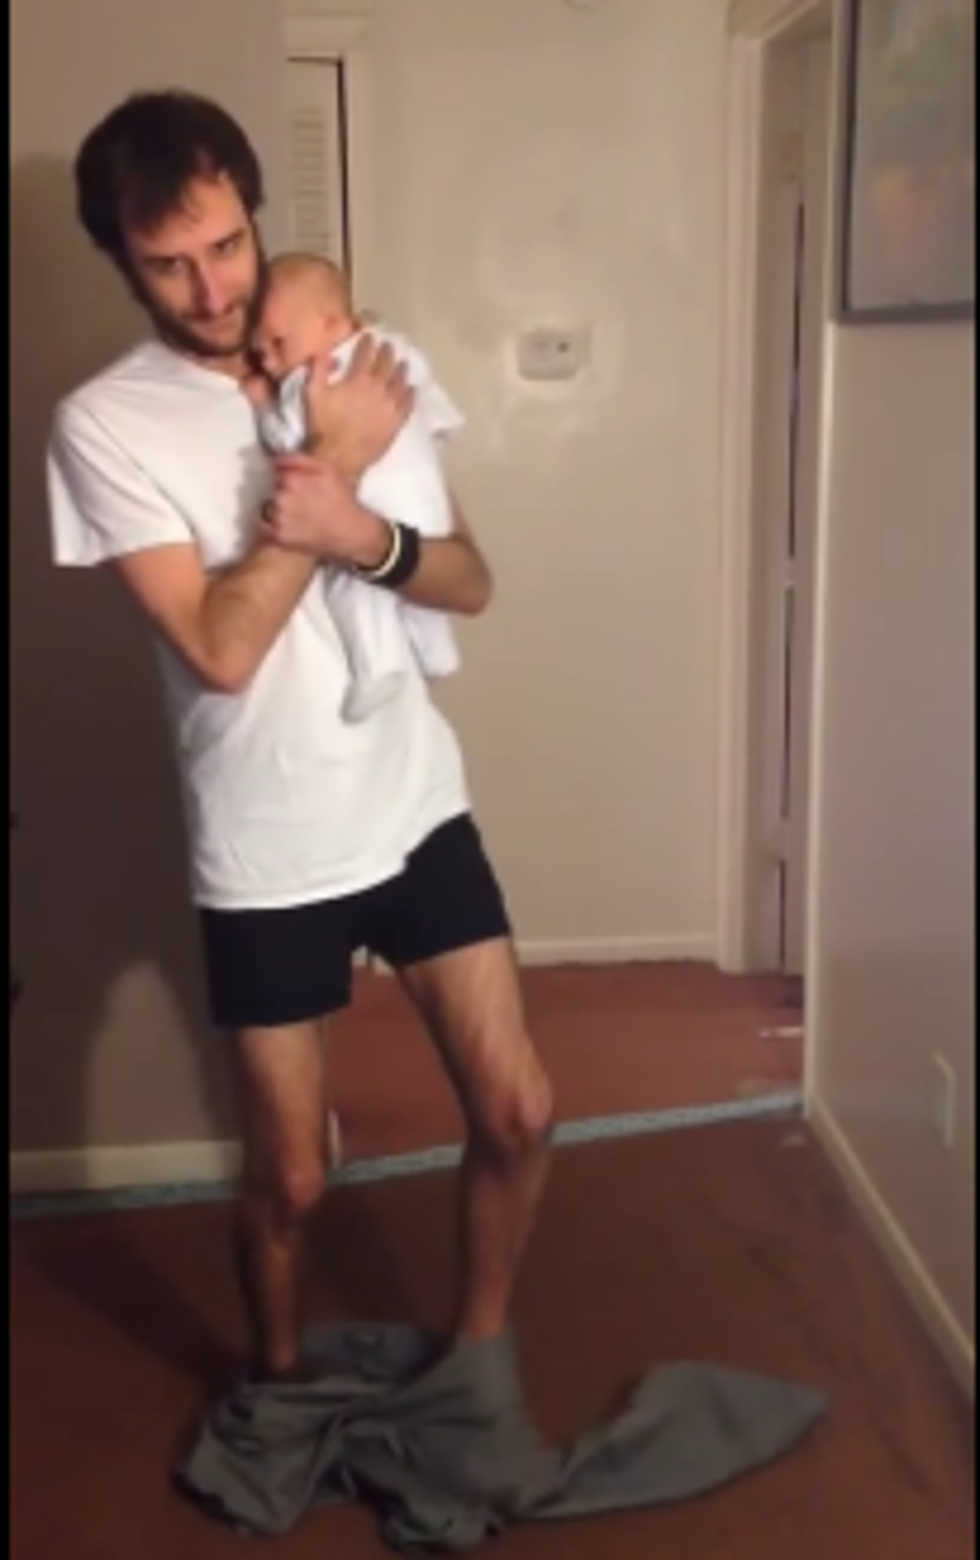 Guy Puts On Pants With No Hands…While Holding A Baby [Video]